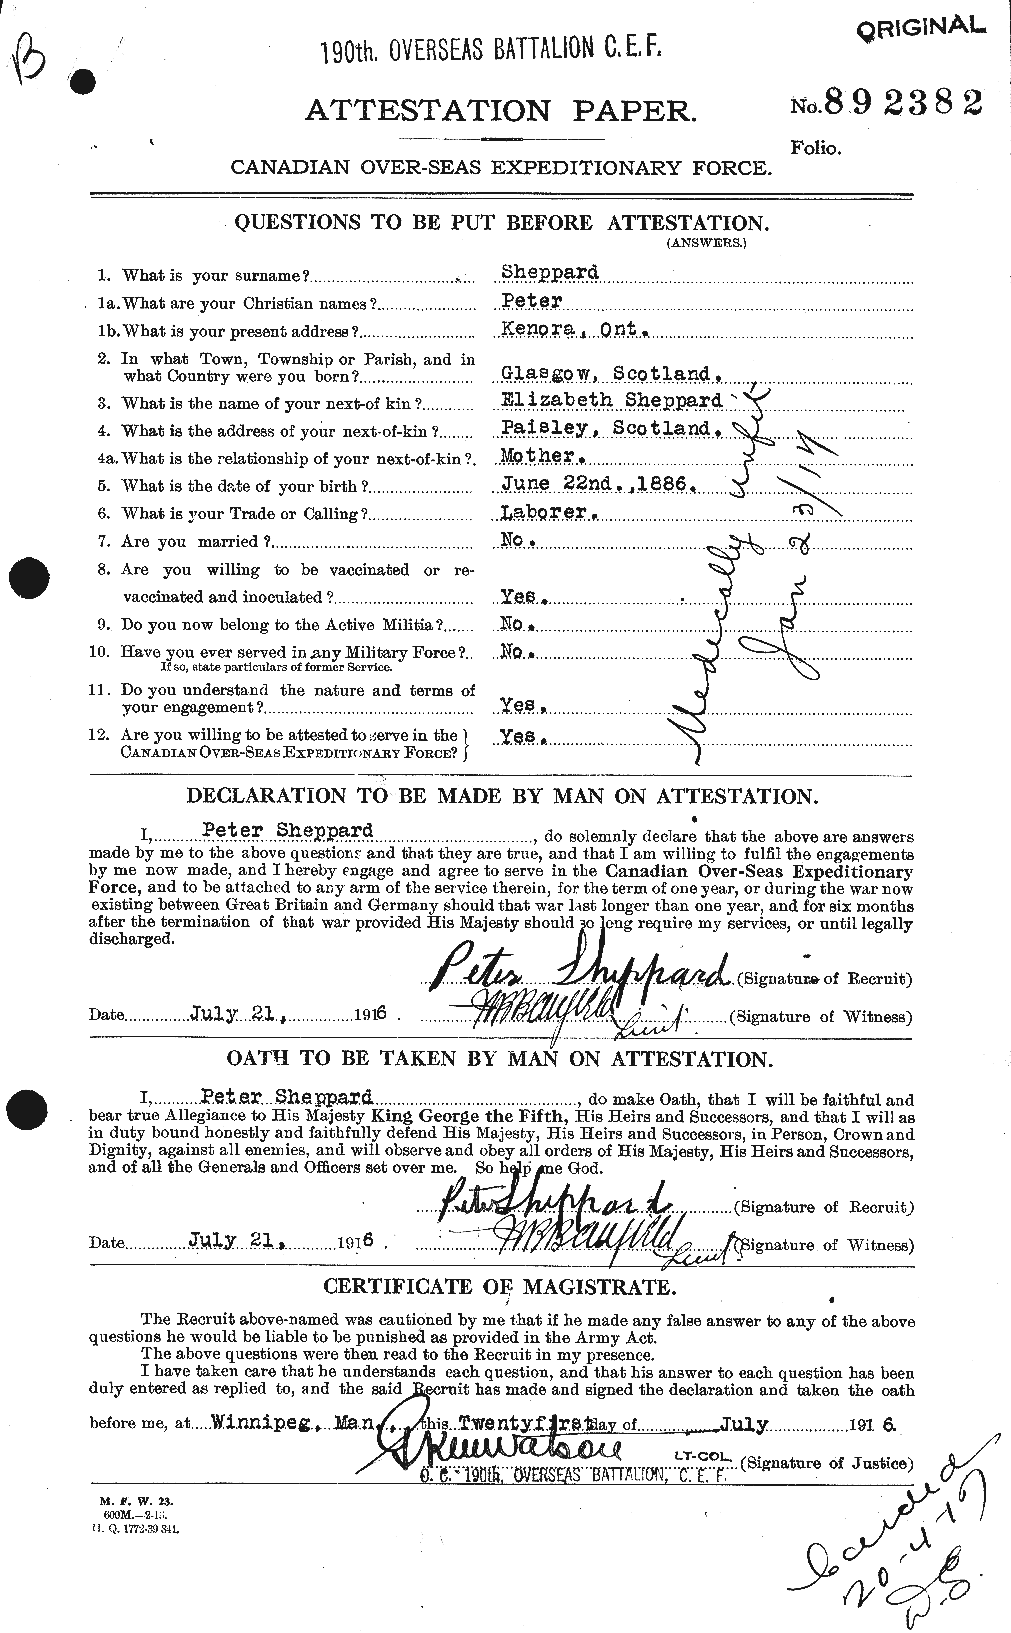 Personnel Records of the First World War - CEF 093475a